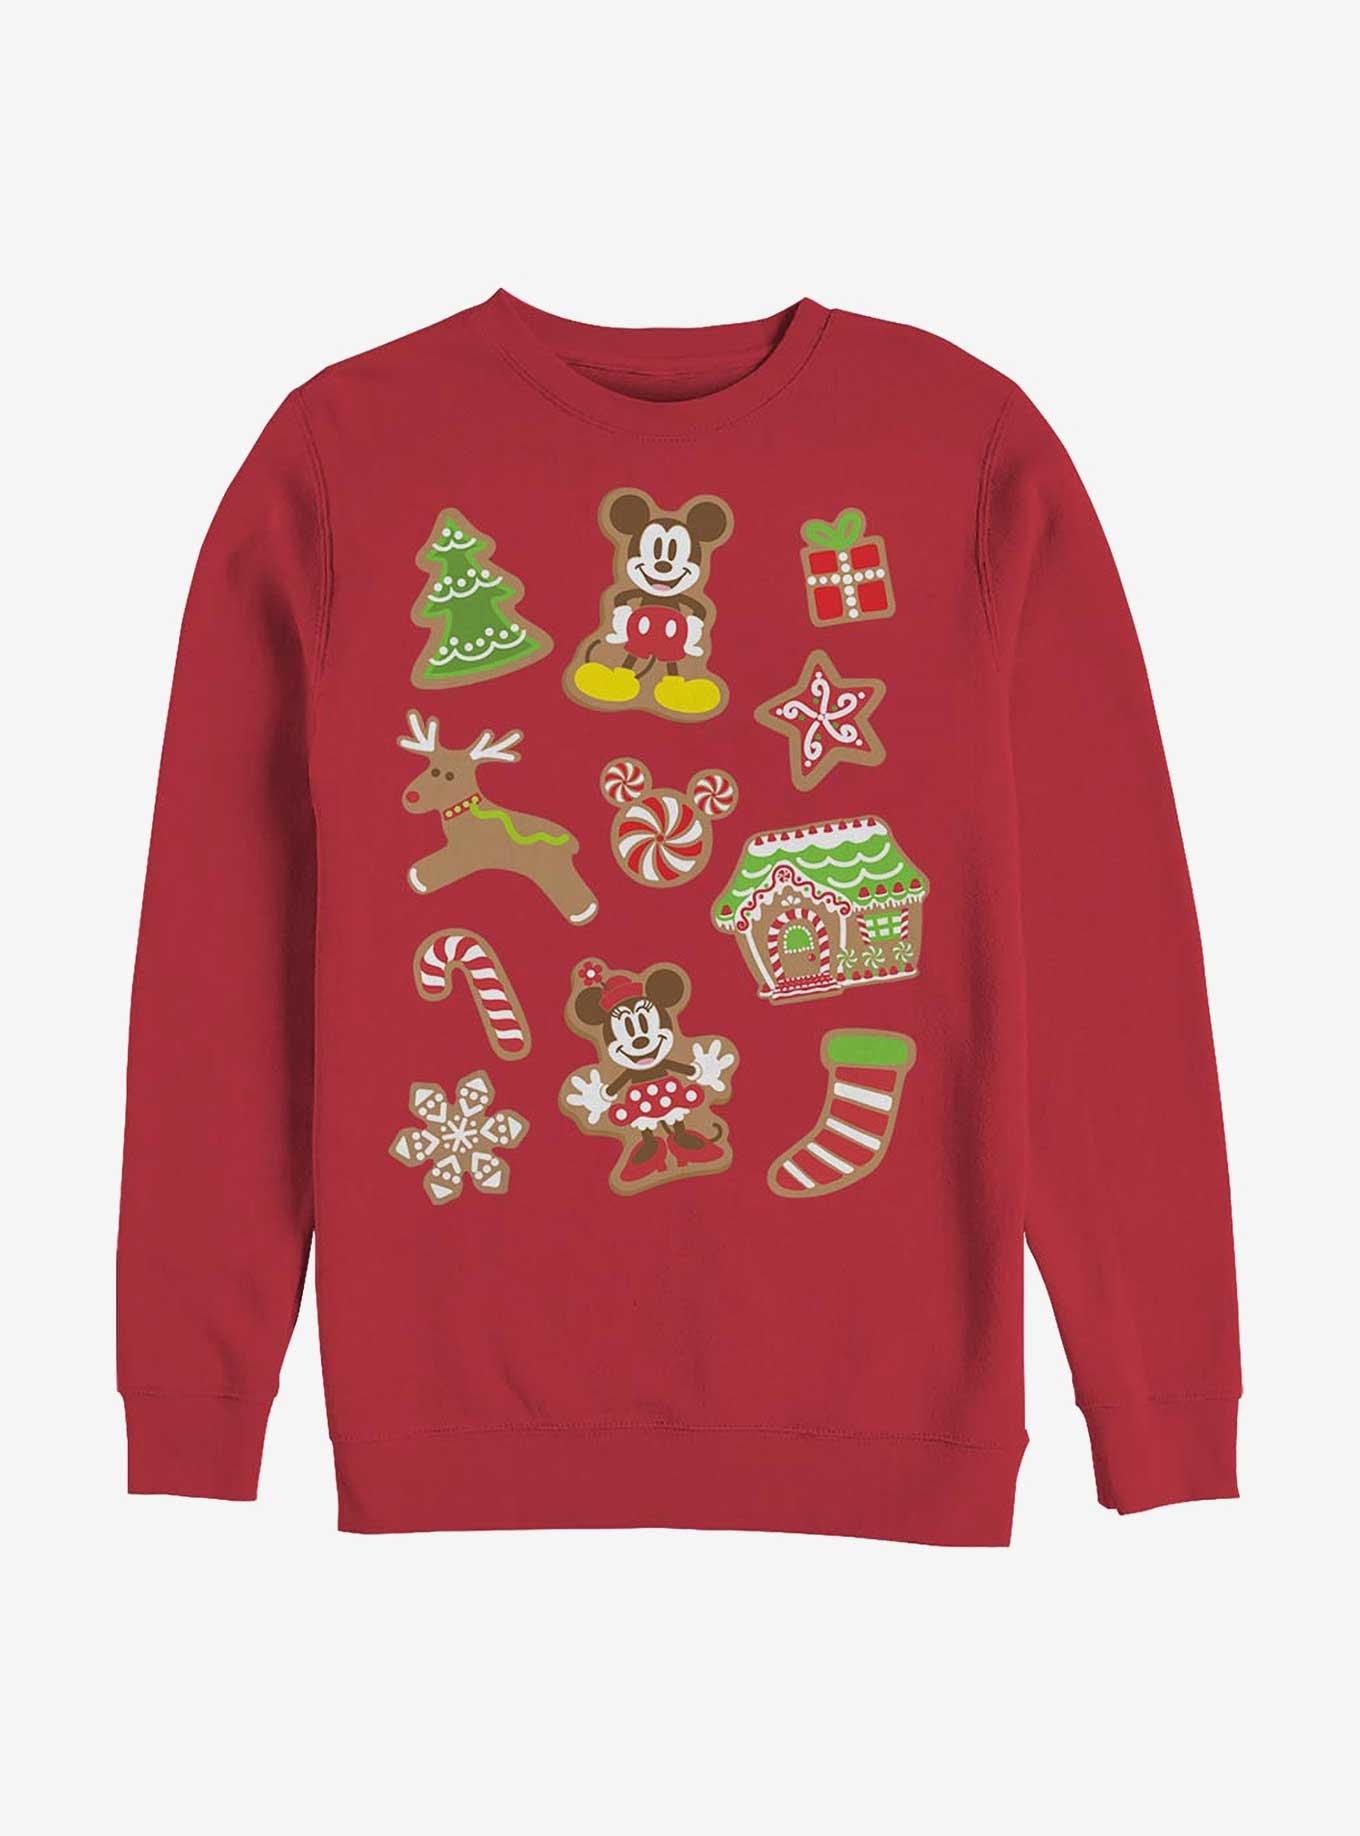 Disney Mickey Mouse & Minnie Mouse Holiday Gingerbread Cookies Sweatshirt, RED, hi-res